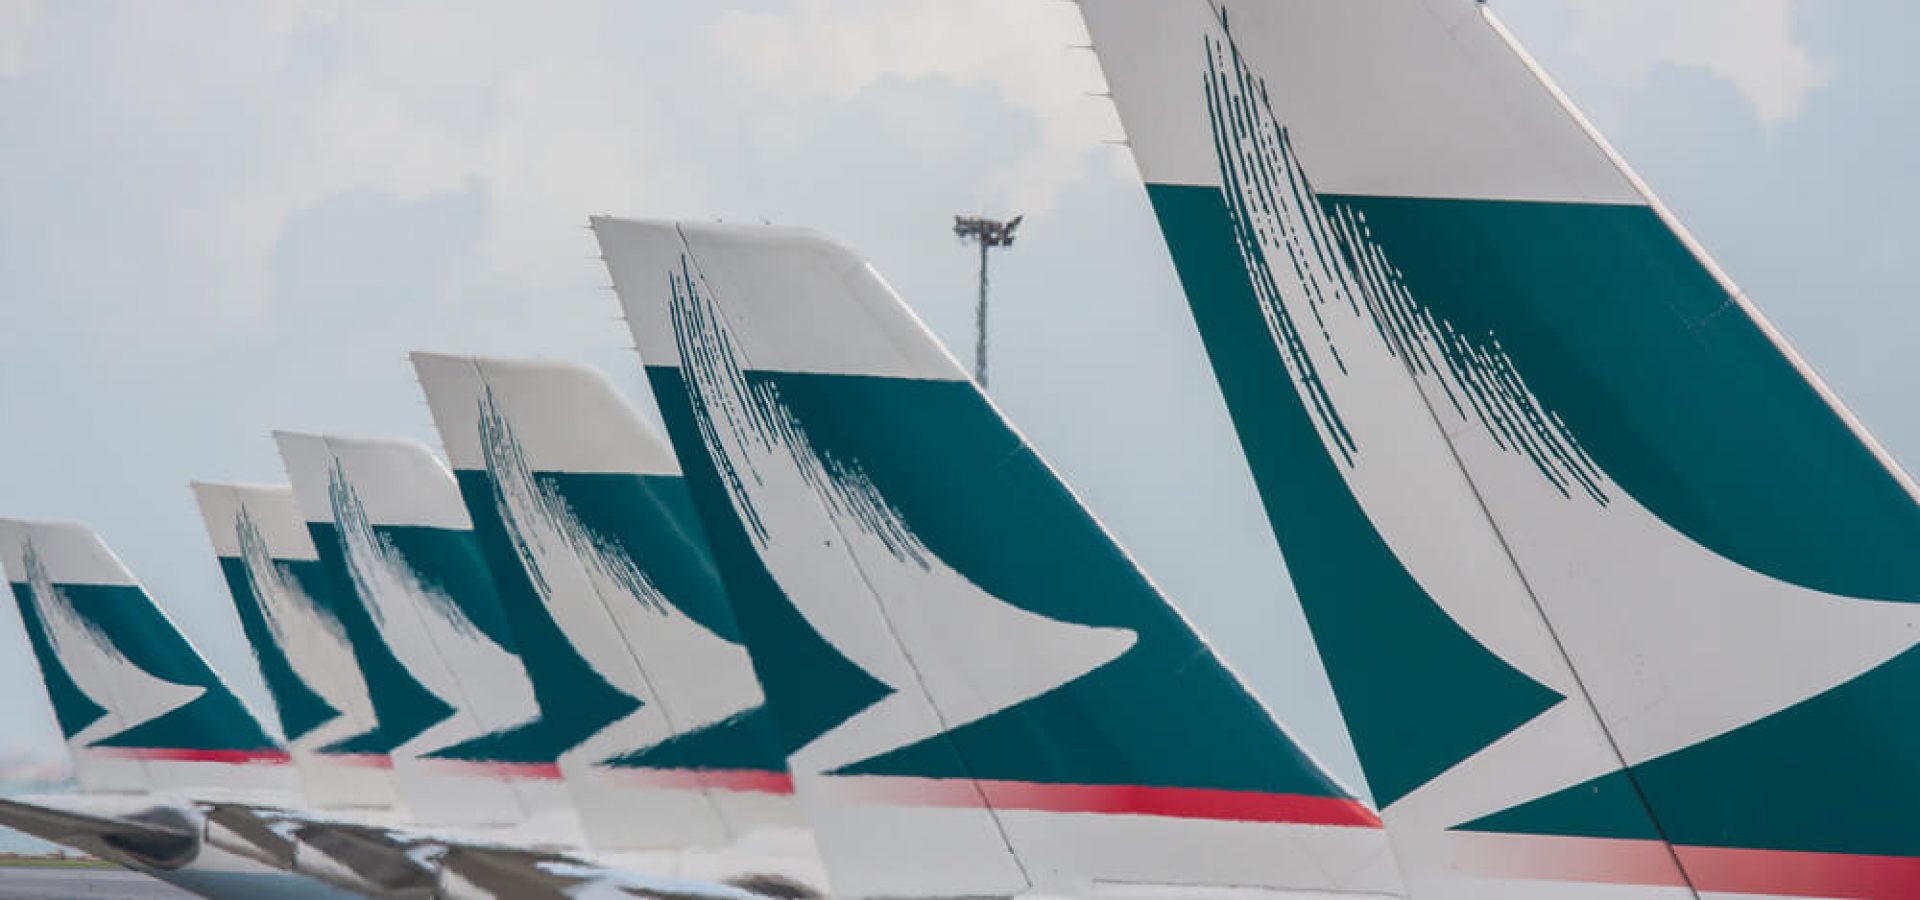 Shares of Cathay Pacific